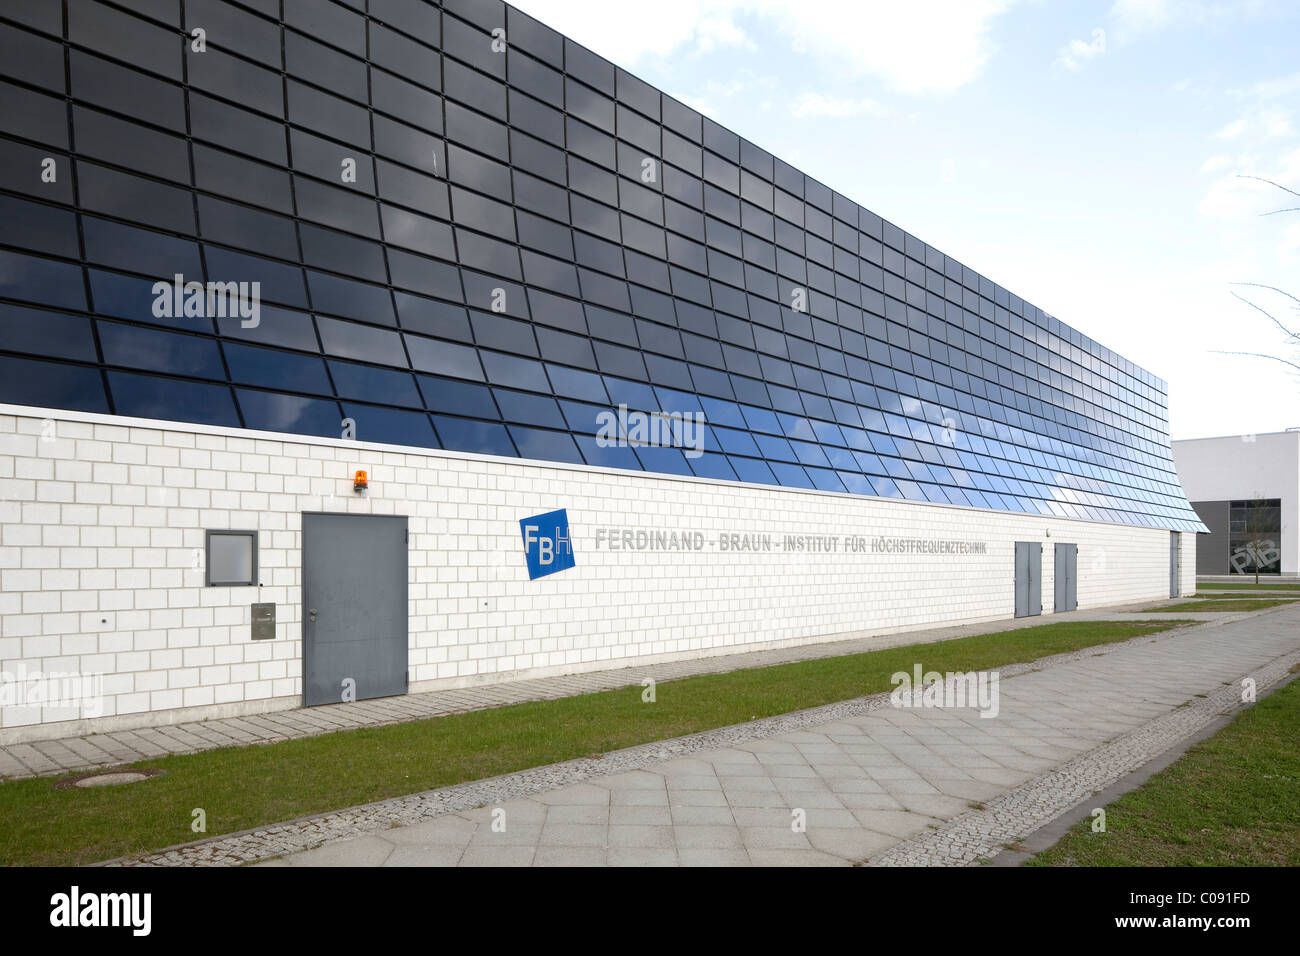 Ferdinand-Braun Institute for High Frequency Technology, Adlershof Science City, Berlin, Germany, Europe Stock Photo